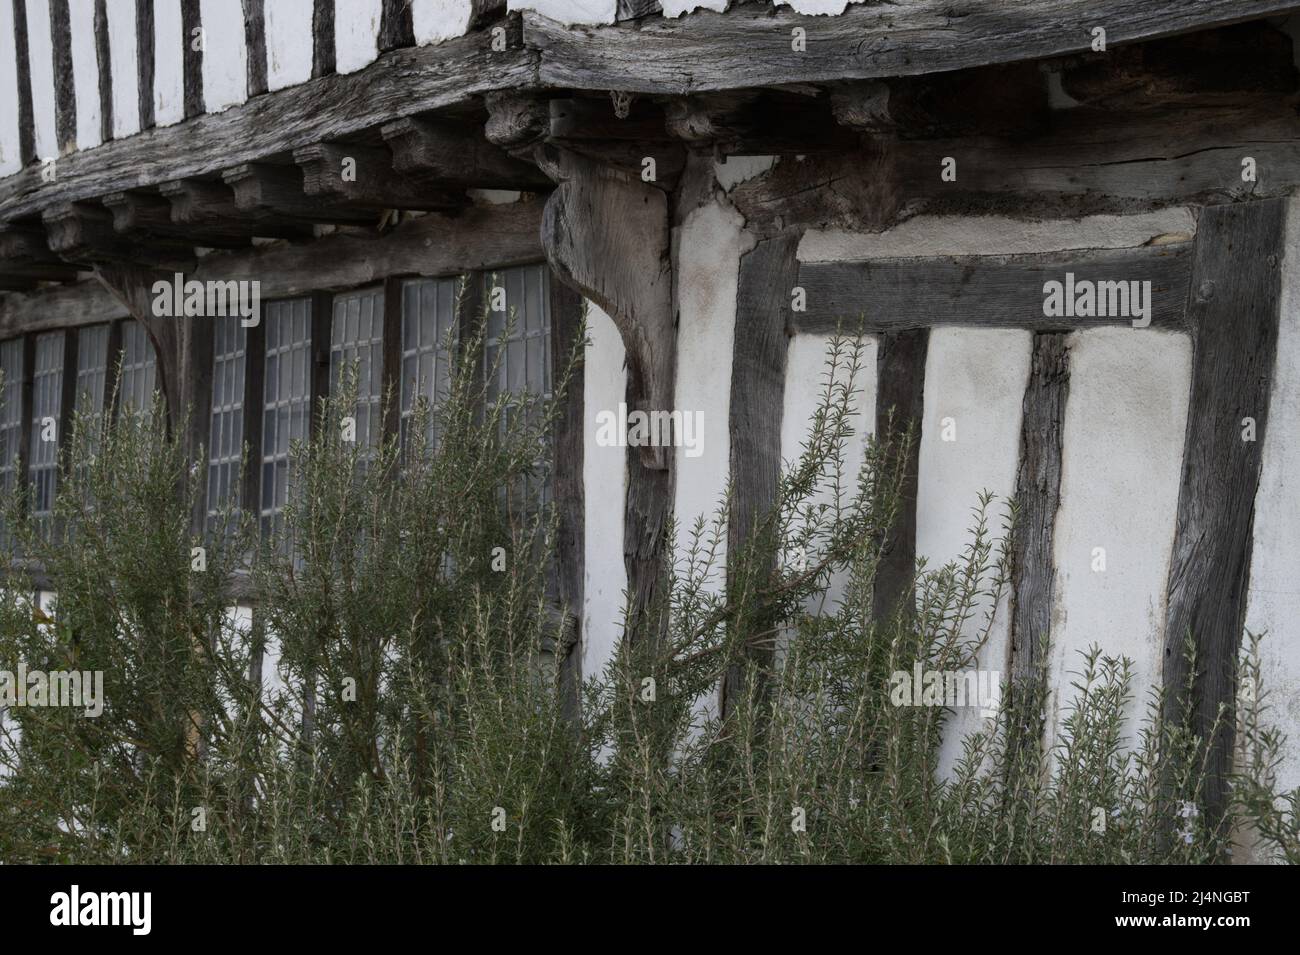 Exterior of an old, delapidated timber framed house Stock Photo